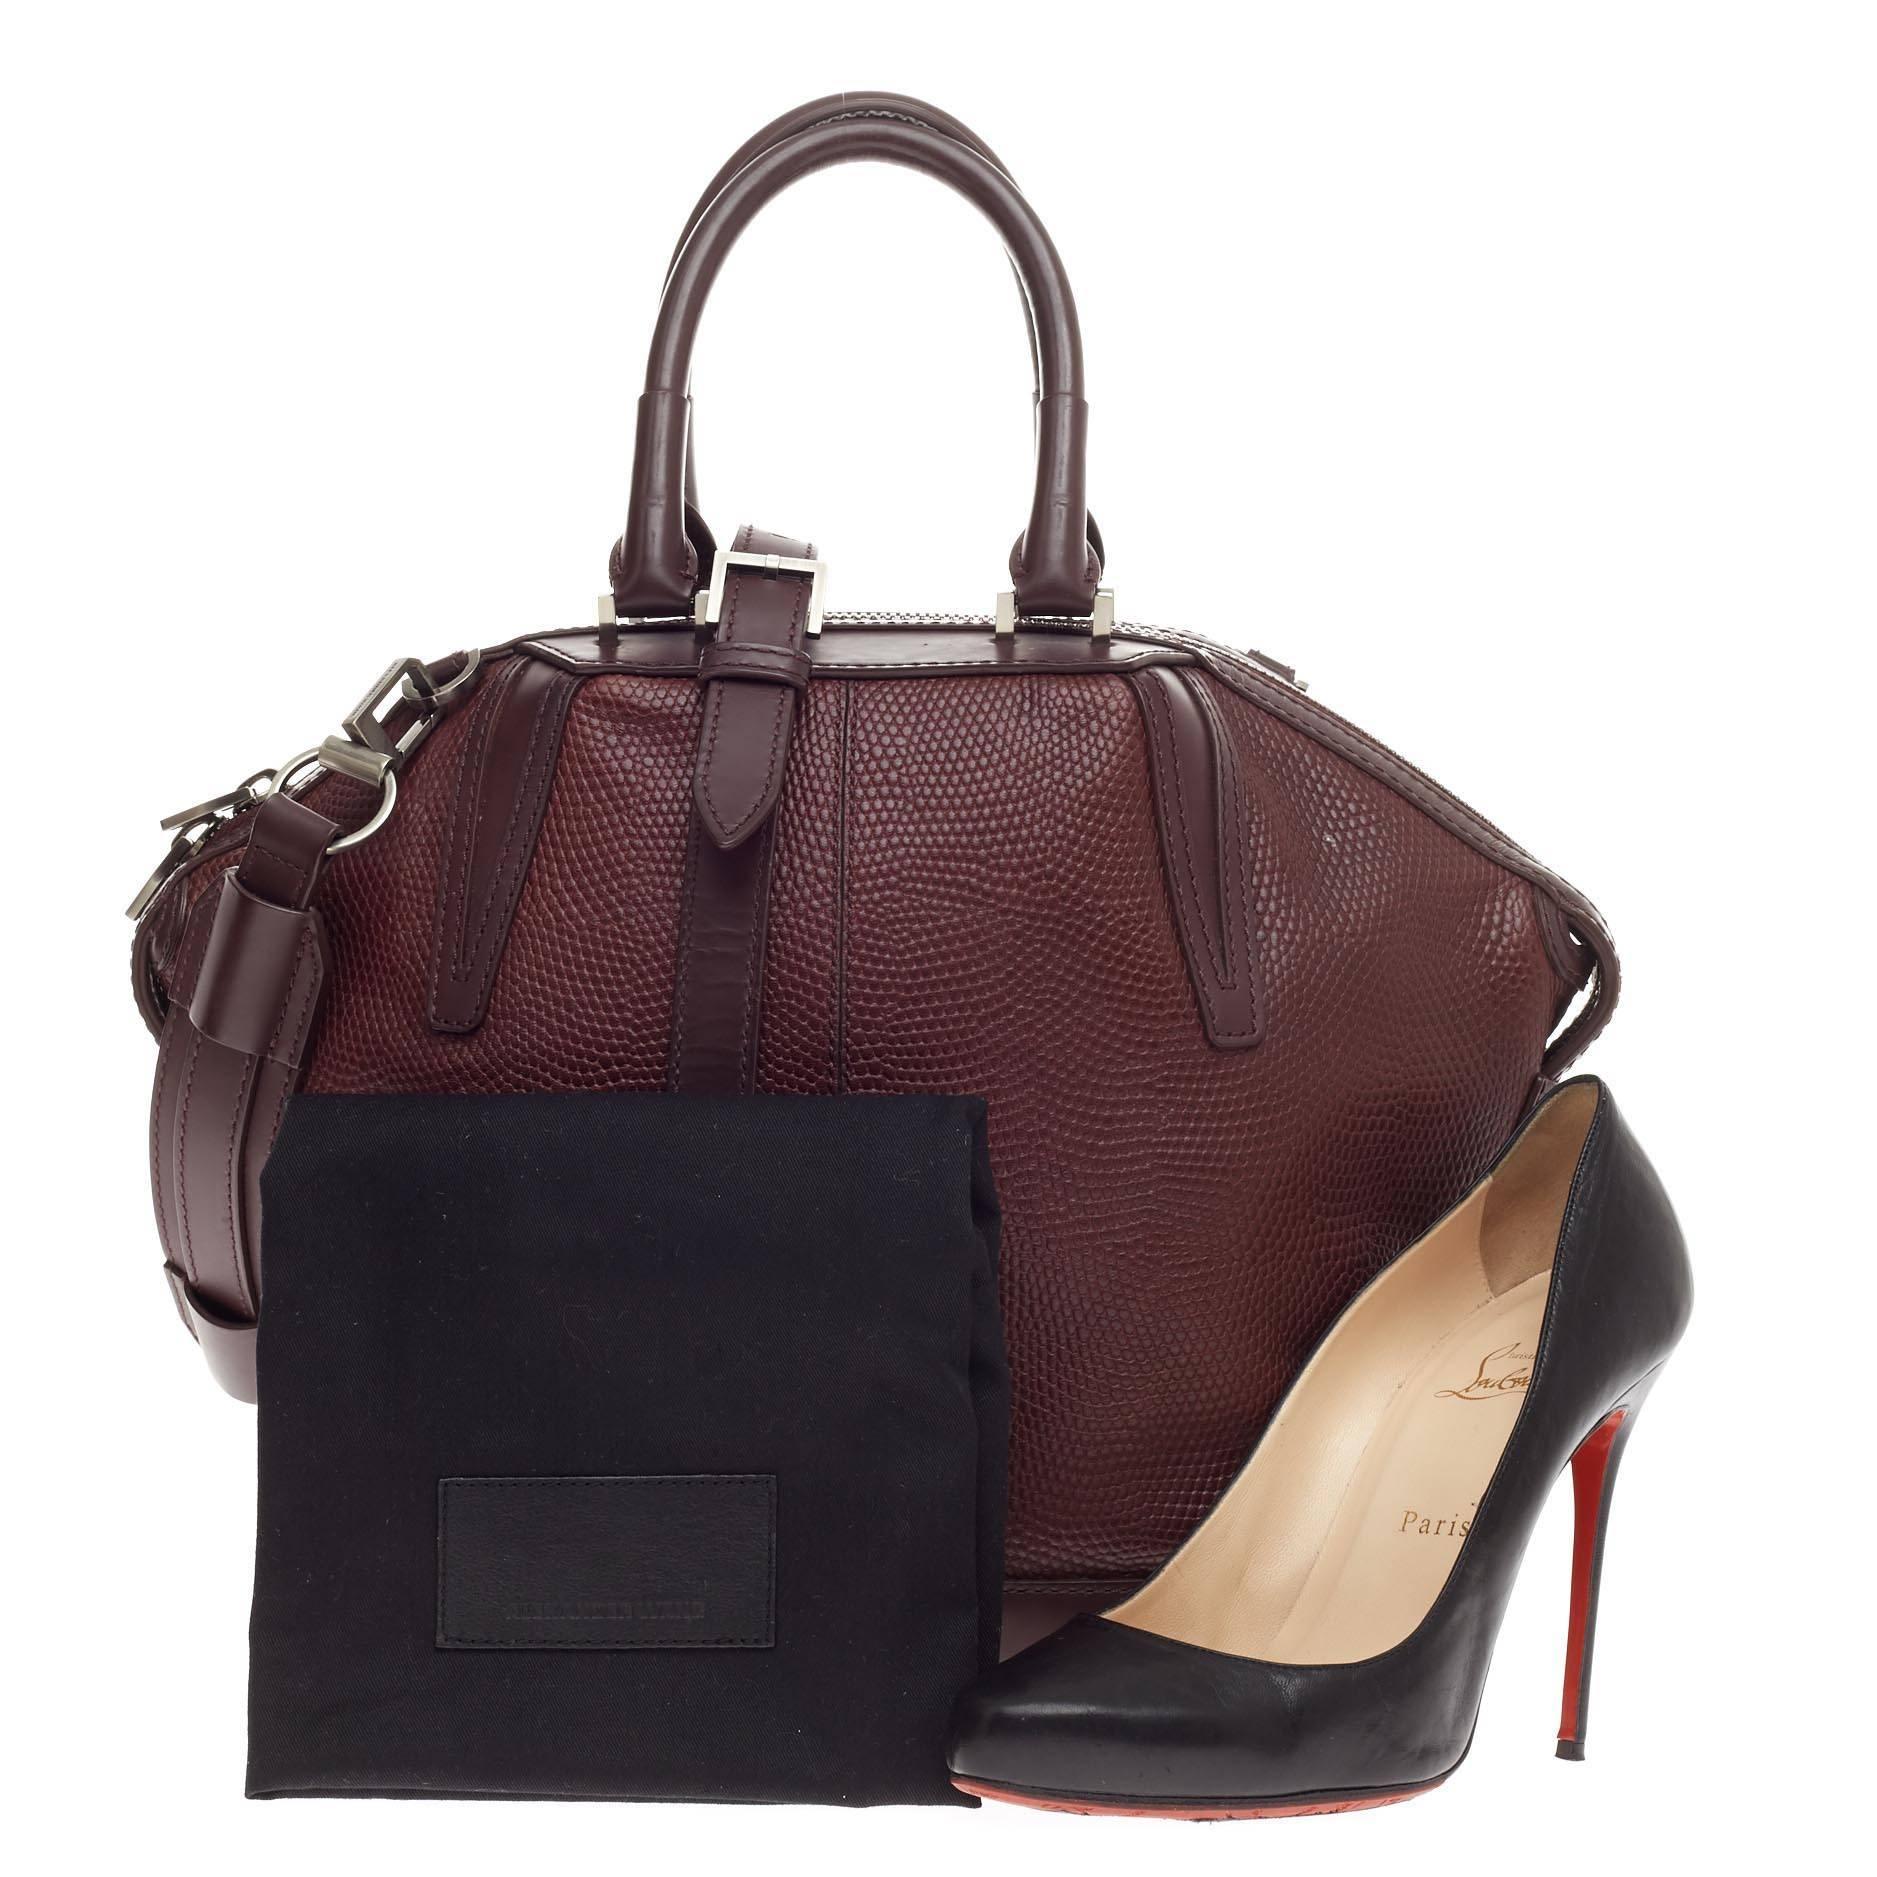 This authentic Alexander Wang Prisma Skeletal Emile Tote Embossed Lizard Large is a stylish easy-to-carry bag for any casual outfit. Crafted from oxblood embossed lizard leather, this angular, tapered bag features four faceted corners and leather